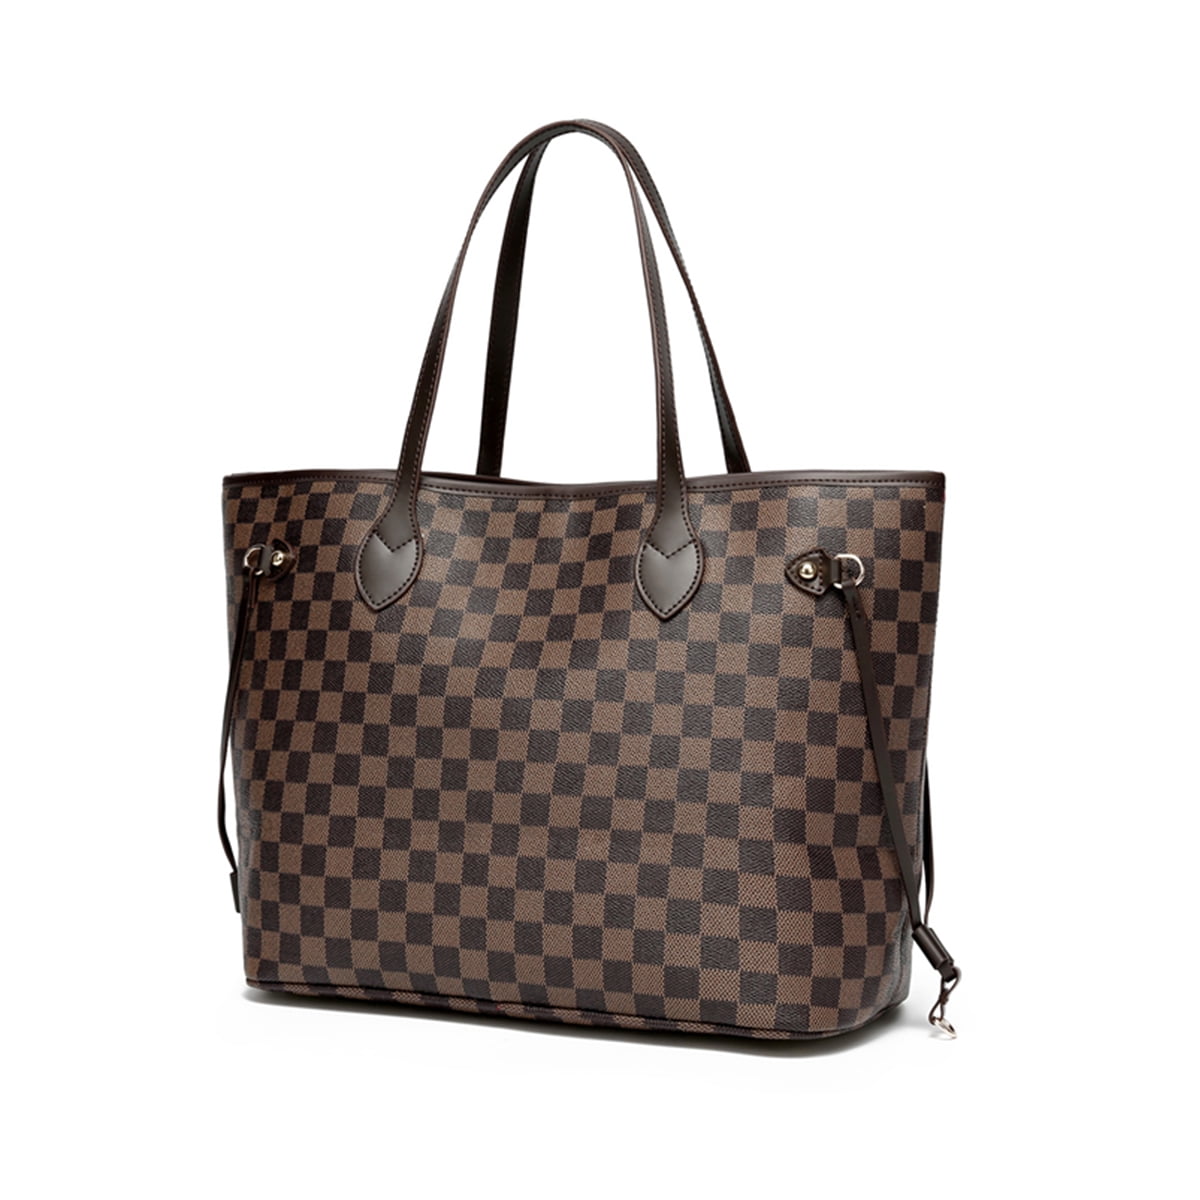 MK Gdledy Checkered Tote Shoulder Purse 3pcs set Handbags Bag with 2 inner  pouch PU Vegan Leather 